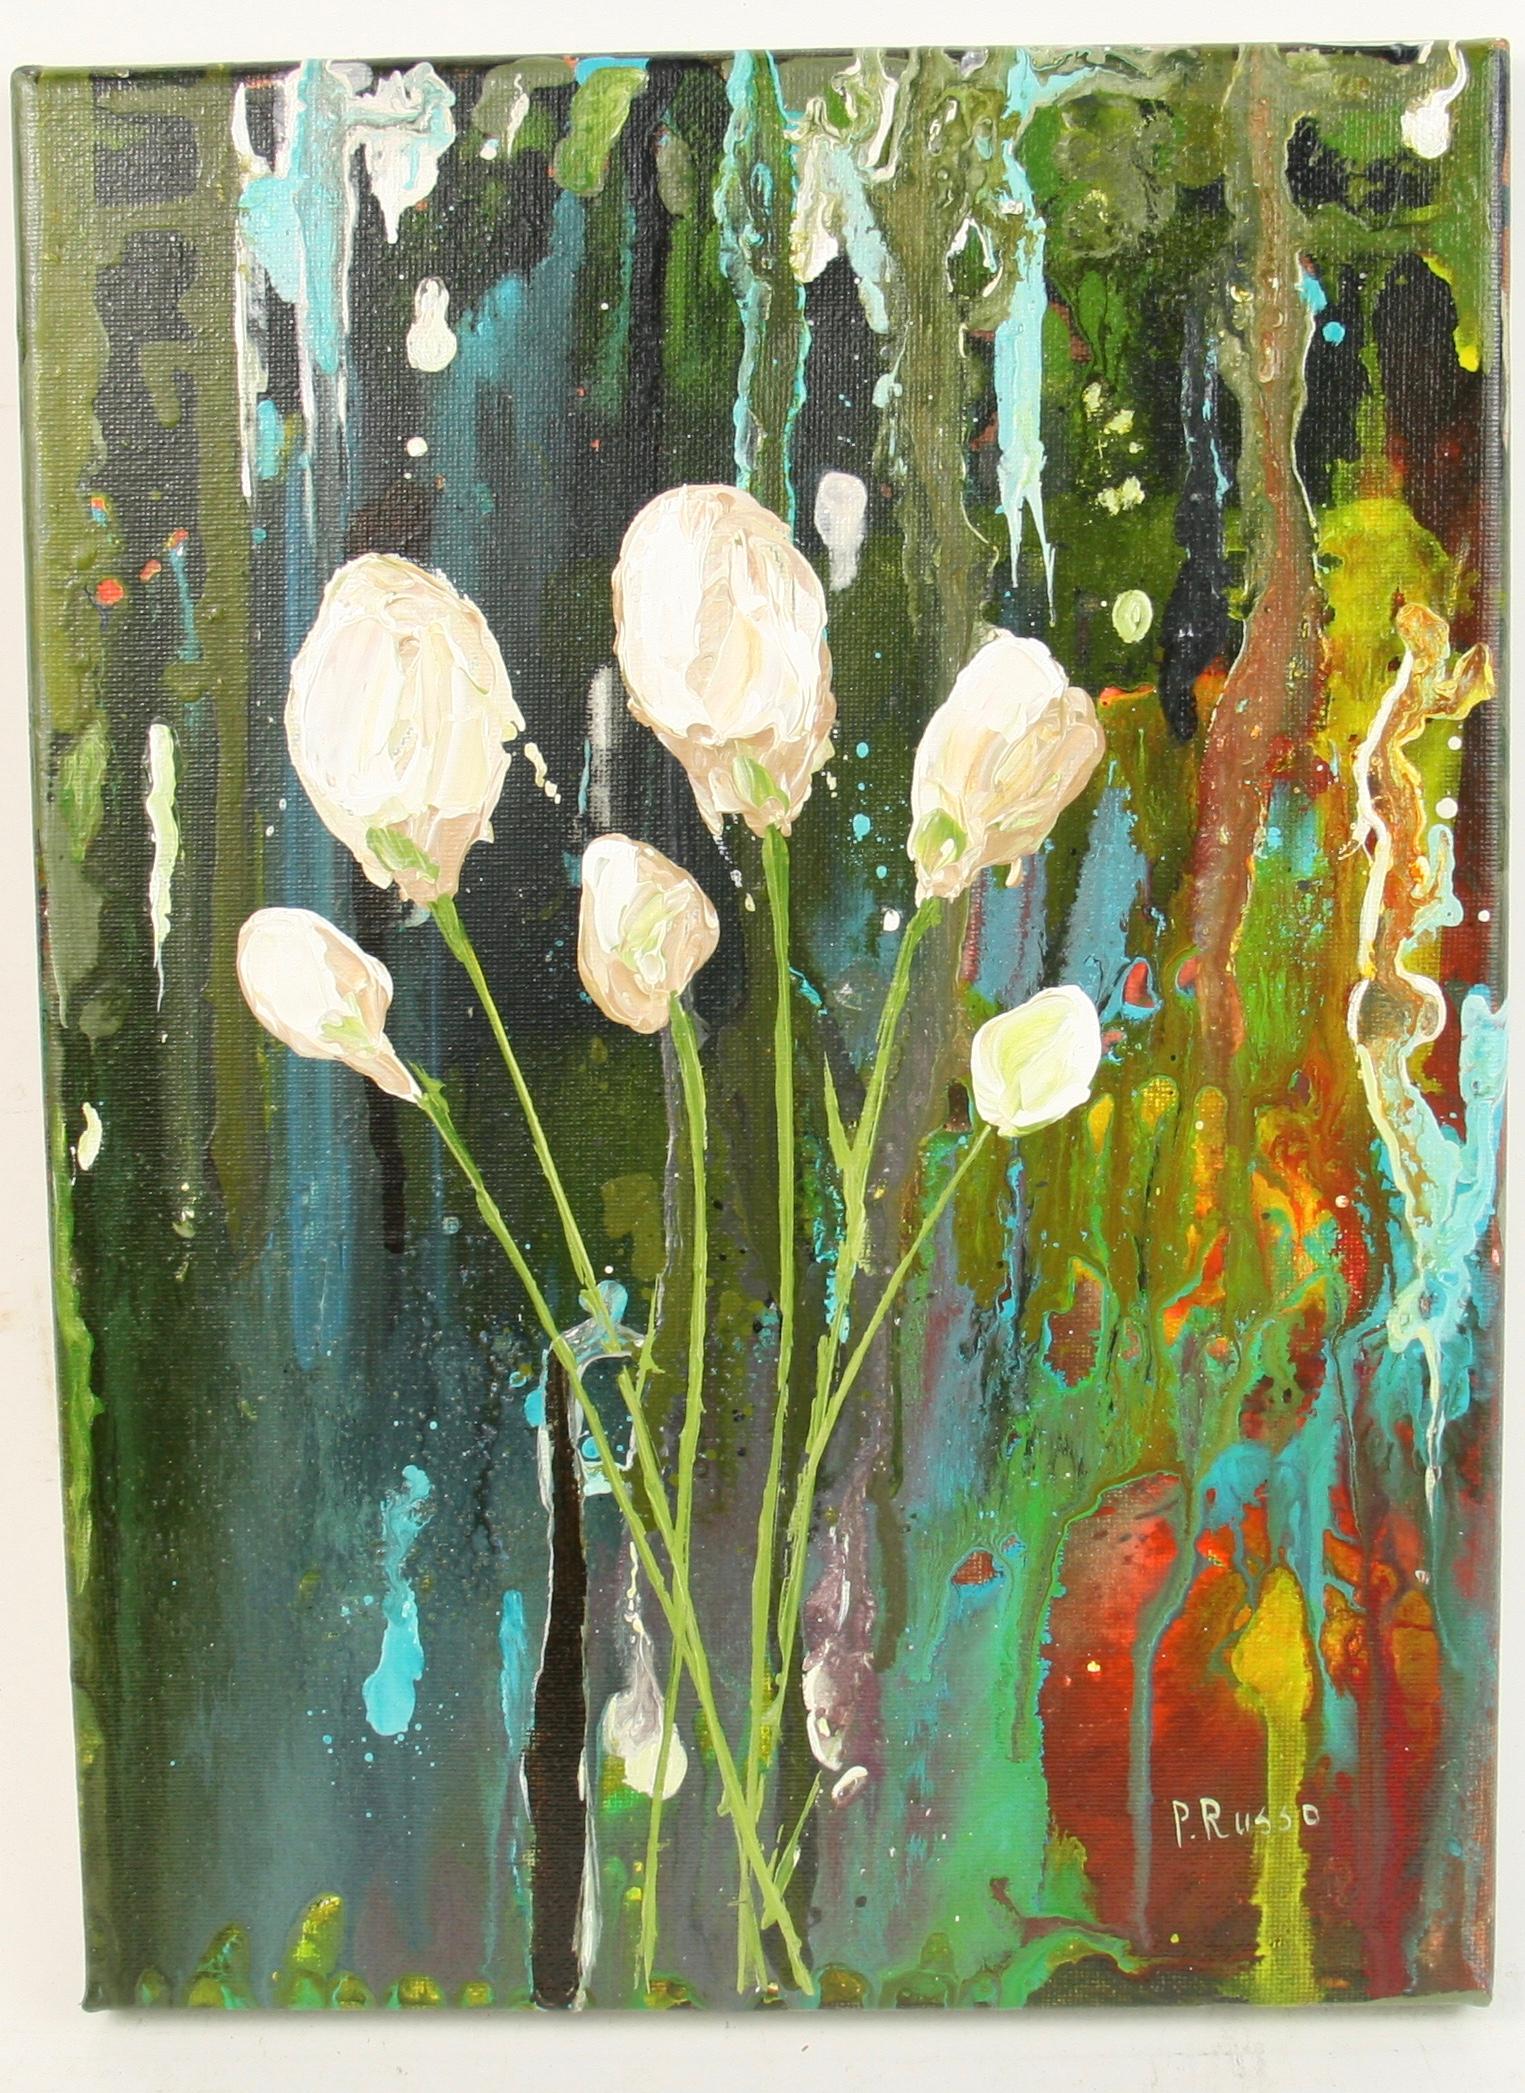 #5-3152 White Tulip abstract ,a contemporary acrylic on canvas signed  lower right by P.Russo 
Raped painted on edge canvas